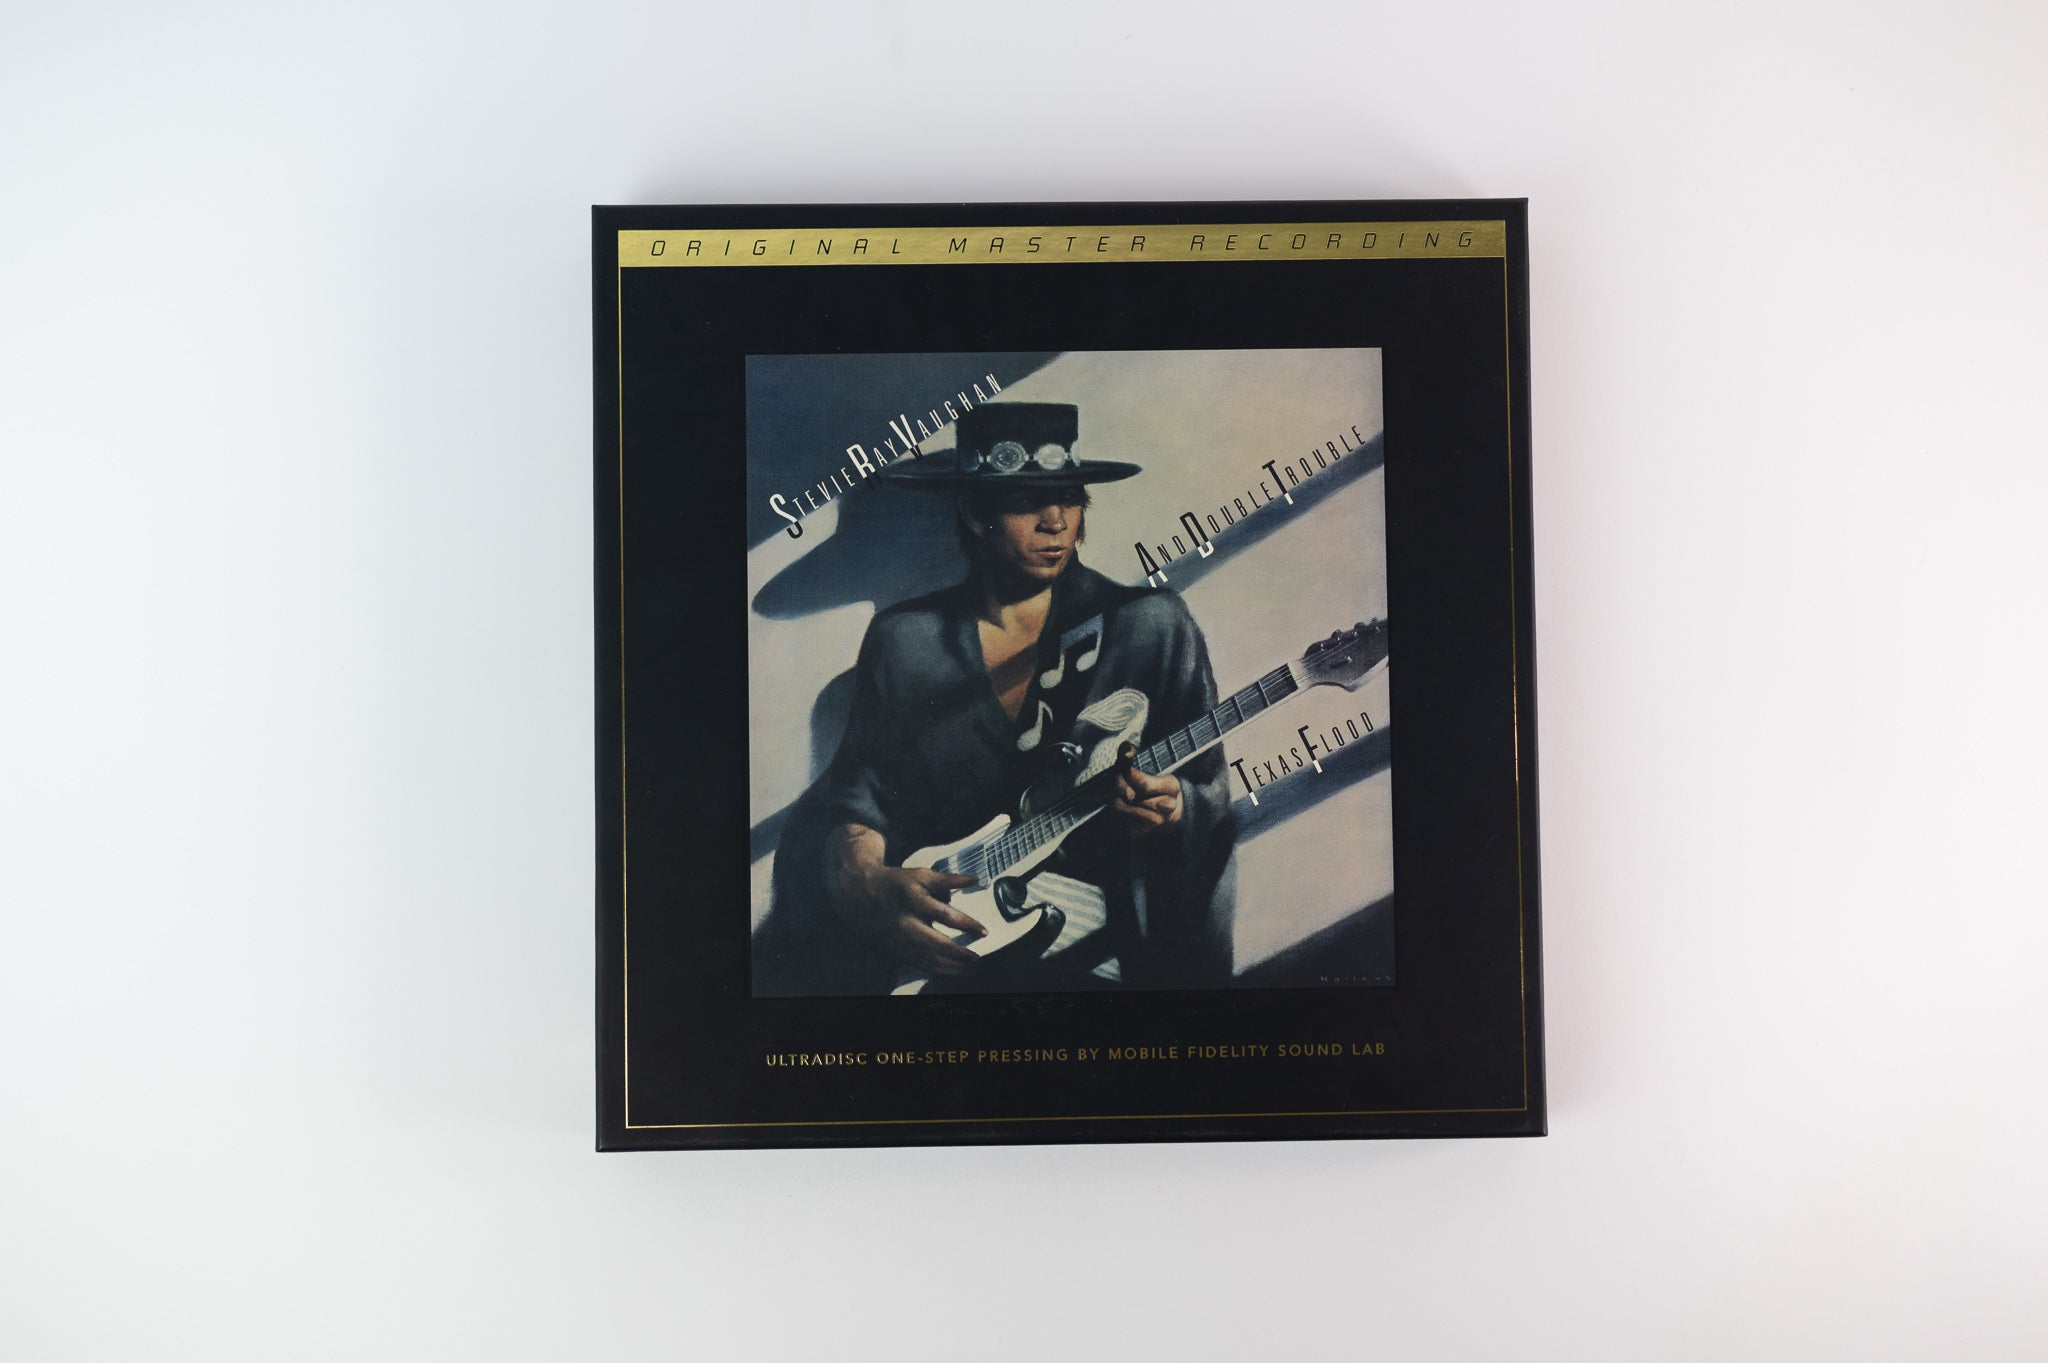 Stevie Ray Vaughan & Double Trouble - Texas Flood on Mobile Fidelity Sound Lab